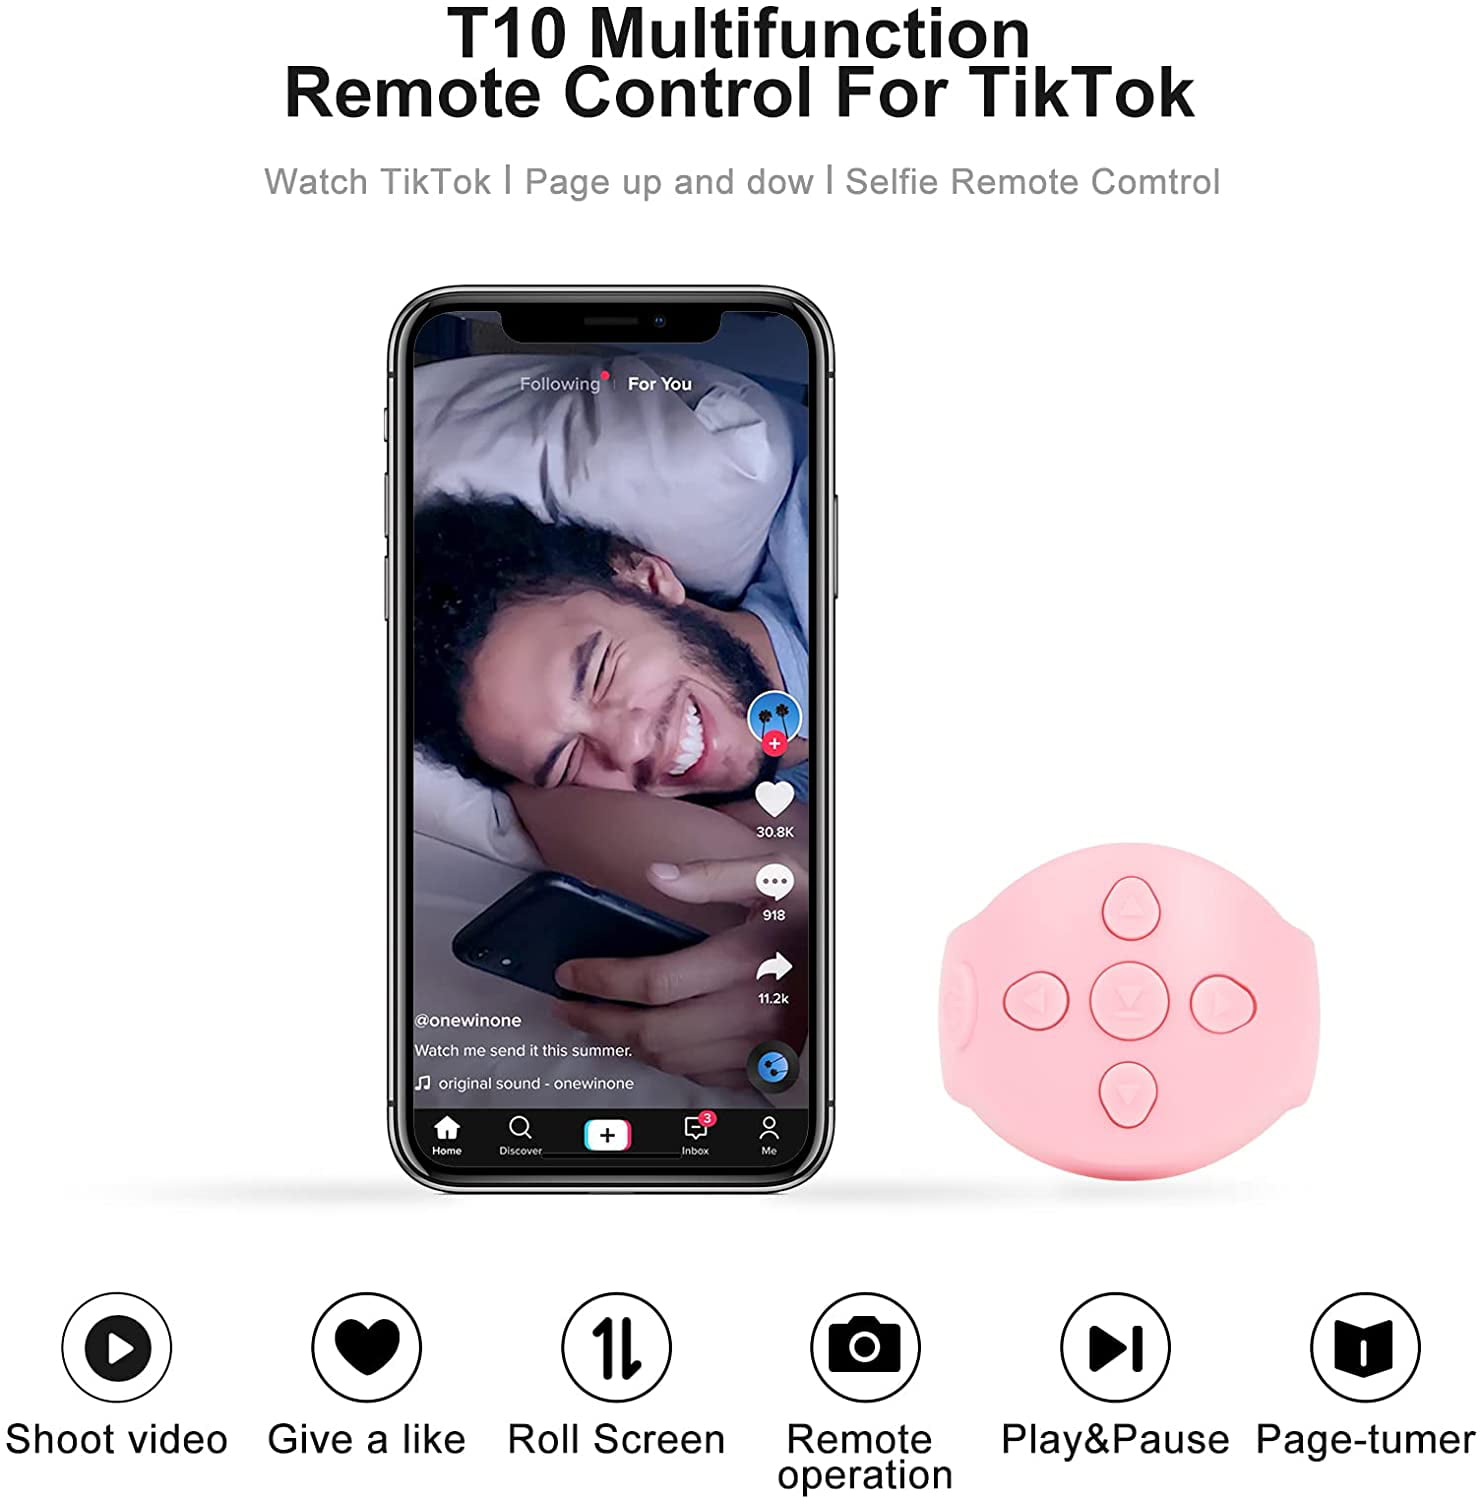 iOS YouTube Video Smart Ring Controller Yamiix Waterproof Phone Ring Accessories for E-Books TIK Tok Compatible with Android Remote Photographing iPad iPhone Up and Down Page Give a Like 